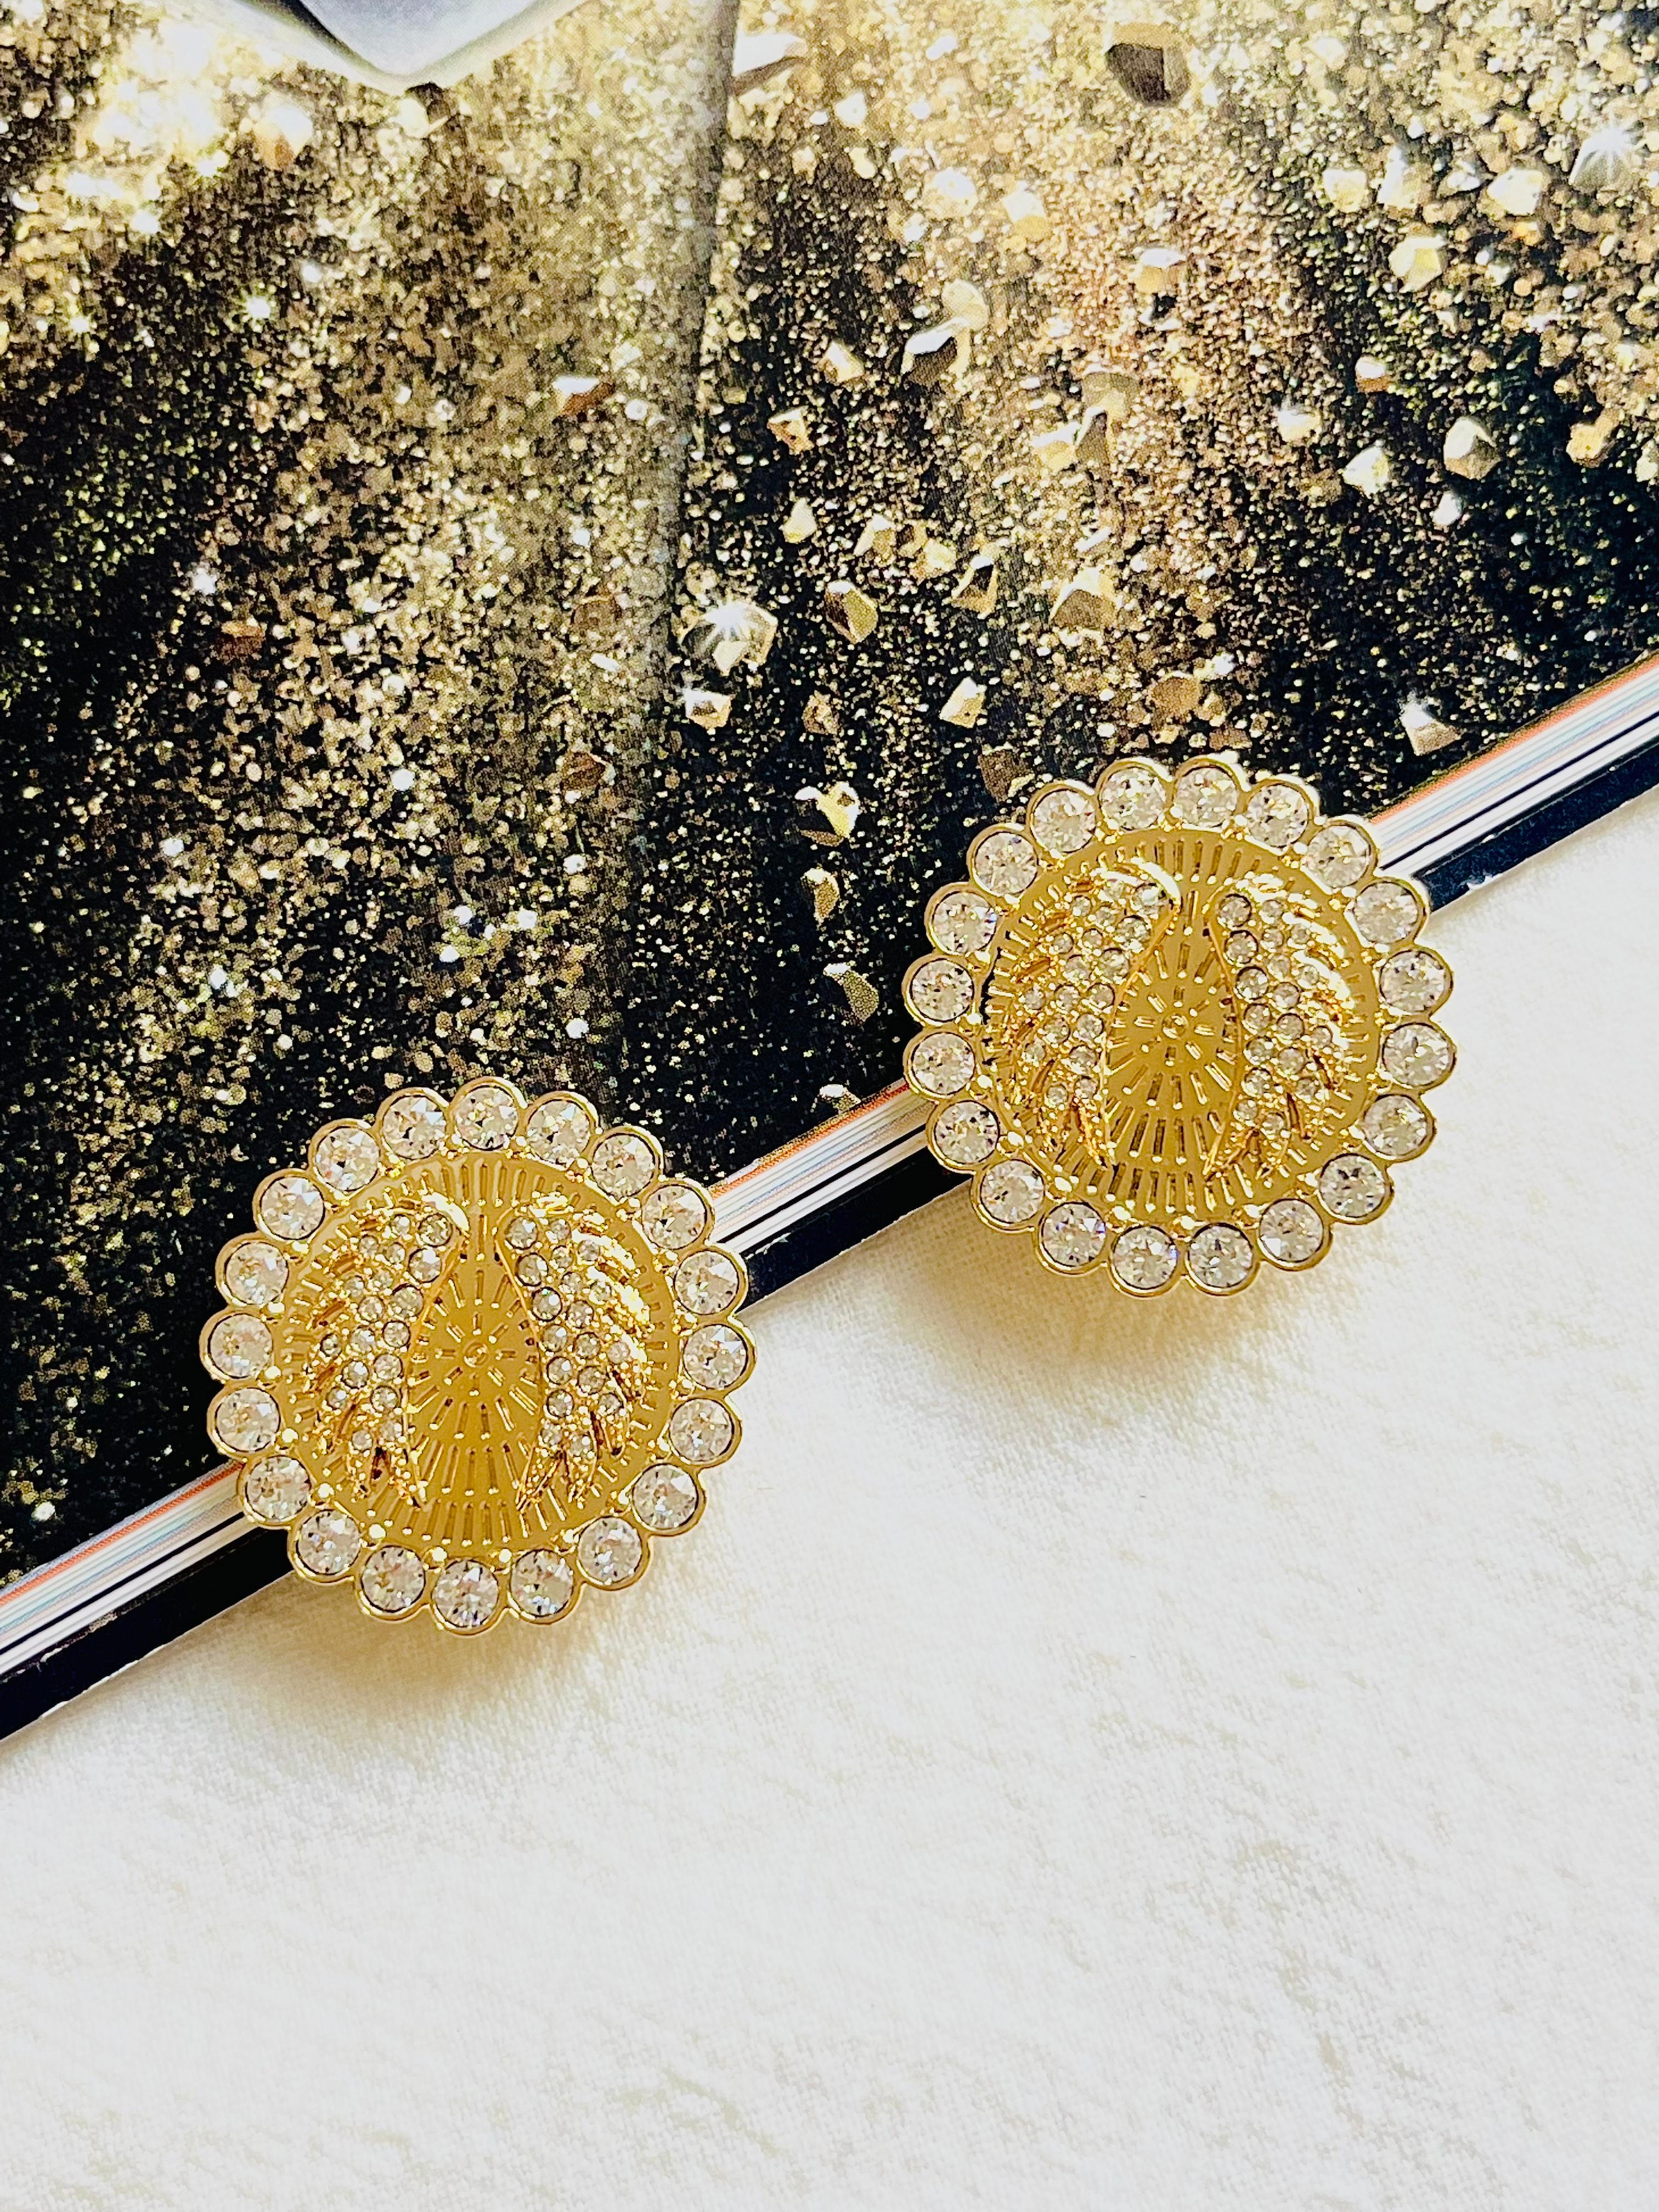 A vision of shimmering clear pavé and finely crafted gold-plated metal, this pair of maxi-size clip earrings will add a burst of meaningful glamour to your ensemble. Each disc shape is embellished with a pair of angel wings, a symbol of hope and